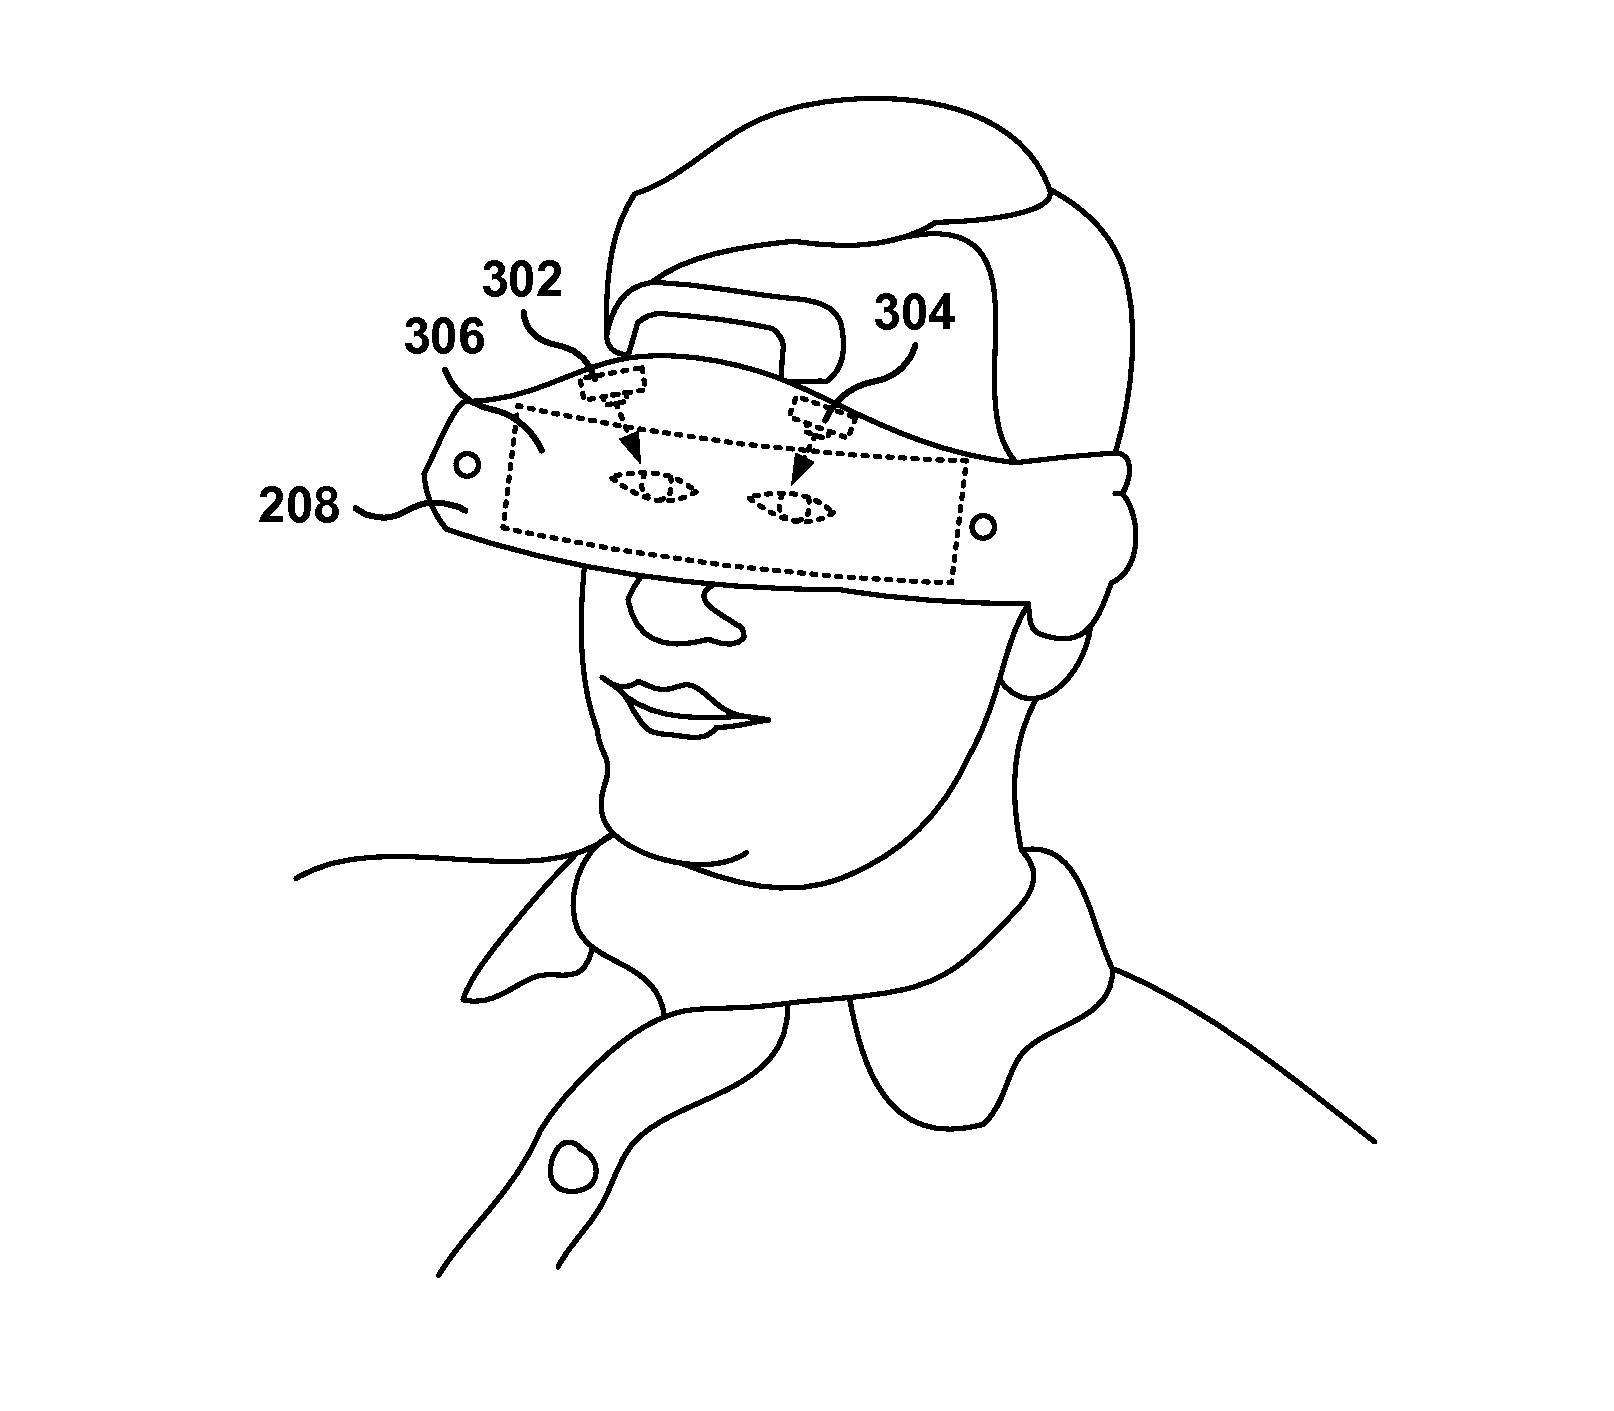 Switching mode of operation in a head mounted display